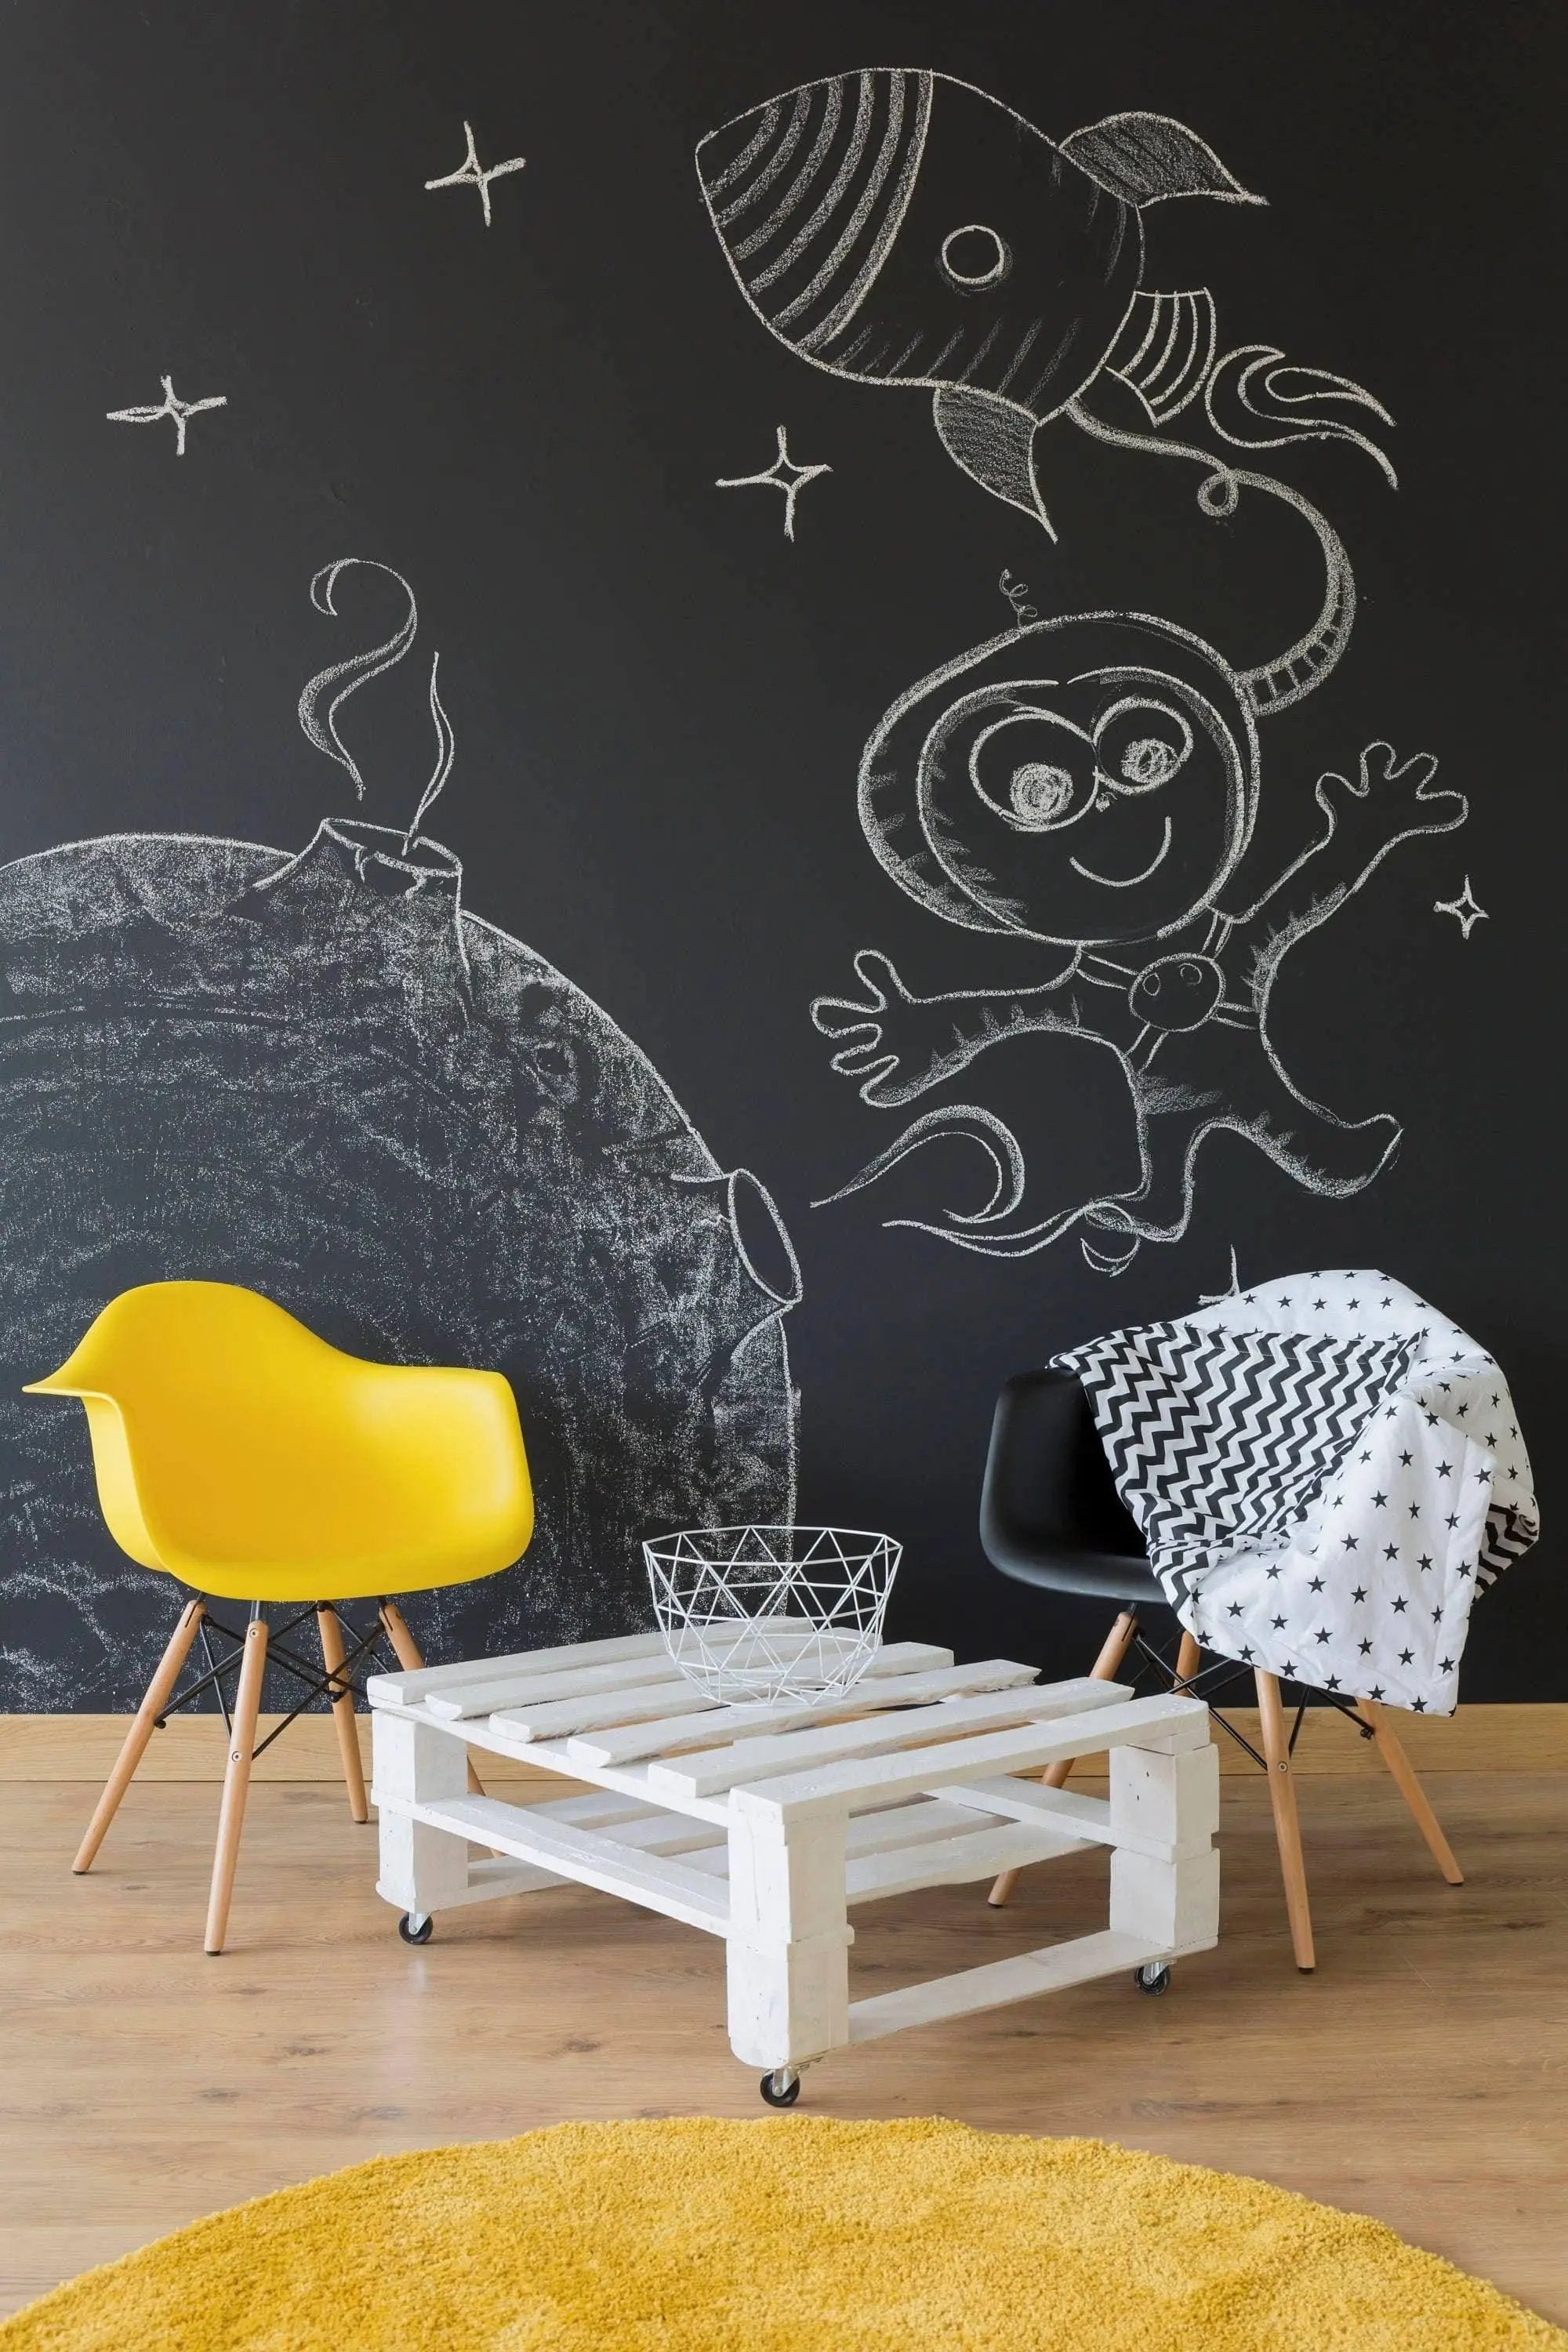 Magnetic Chalkboard Contact Paper, Self Adhesive Chalk Black Board  Wallpaper, 35 x 47 Inch Blackboard Sheet Sticker Roll for Wall School Home  with